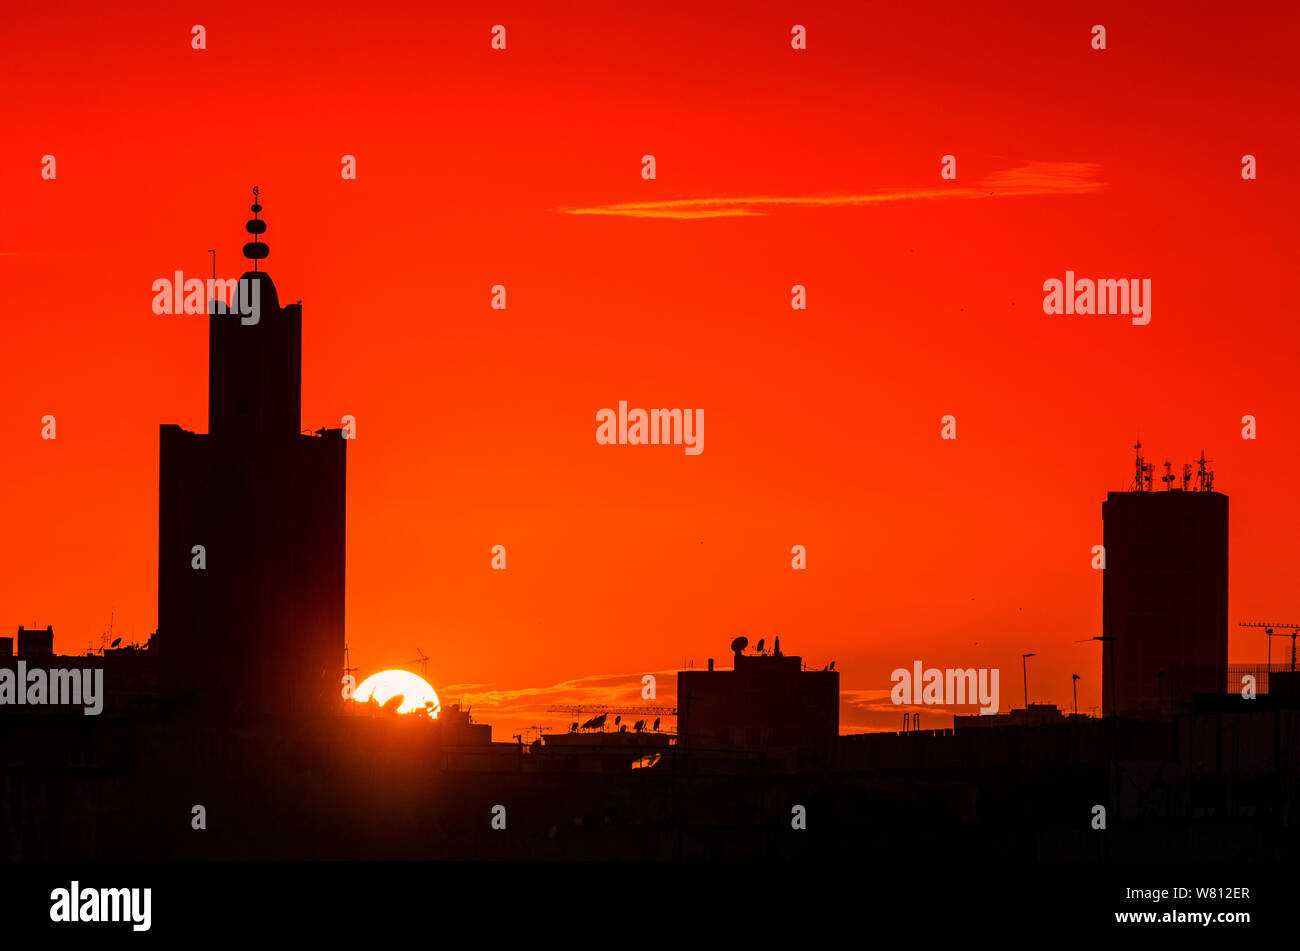 Sunset over the city, a mosque and buildings in silhouette on a background of orange sky. Stock Photo